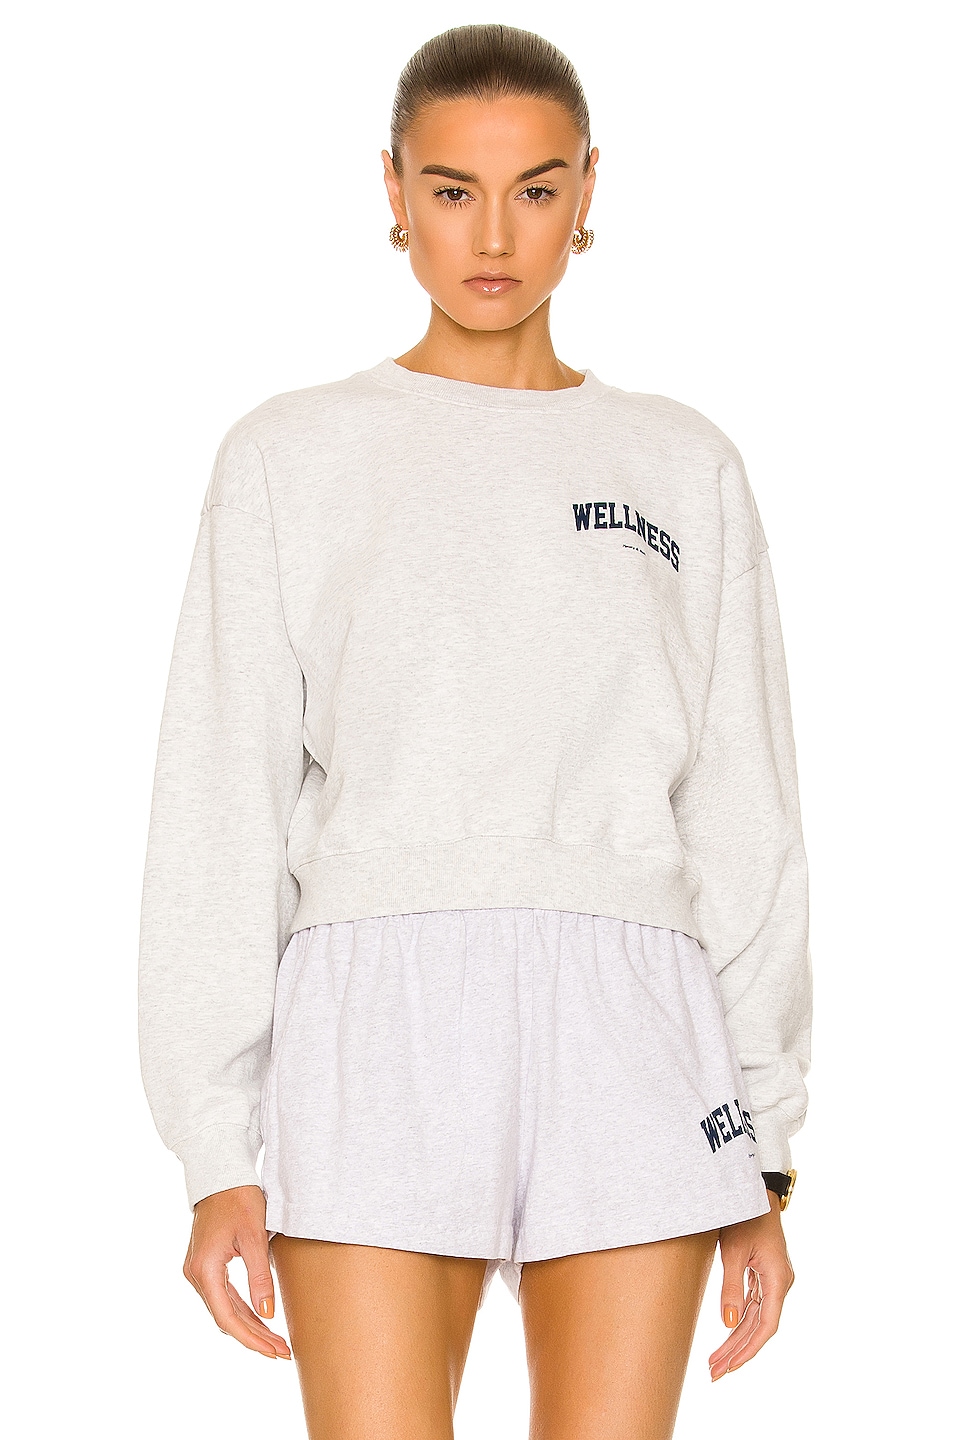 Image 1 of Sporty & Rich Wellness Ivy Cropped Crewneck Sweatshirt in Heather Gray & Navy